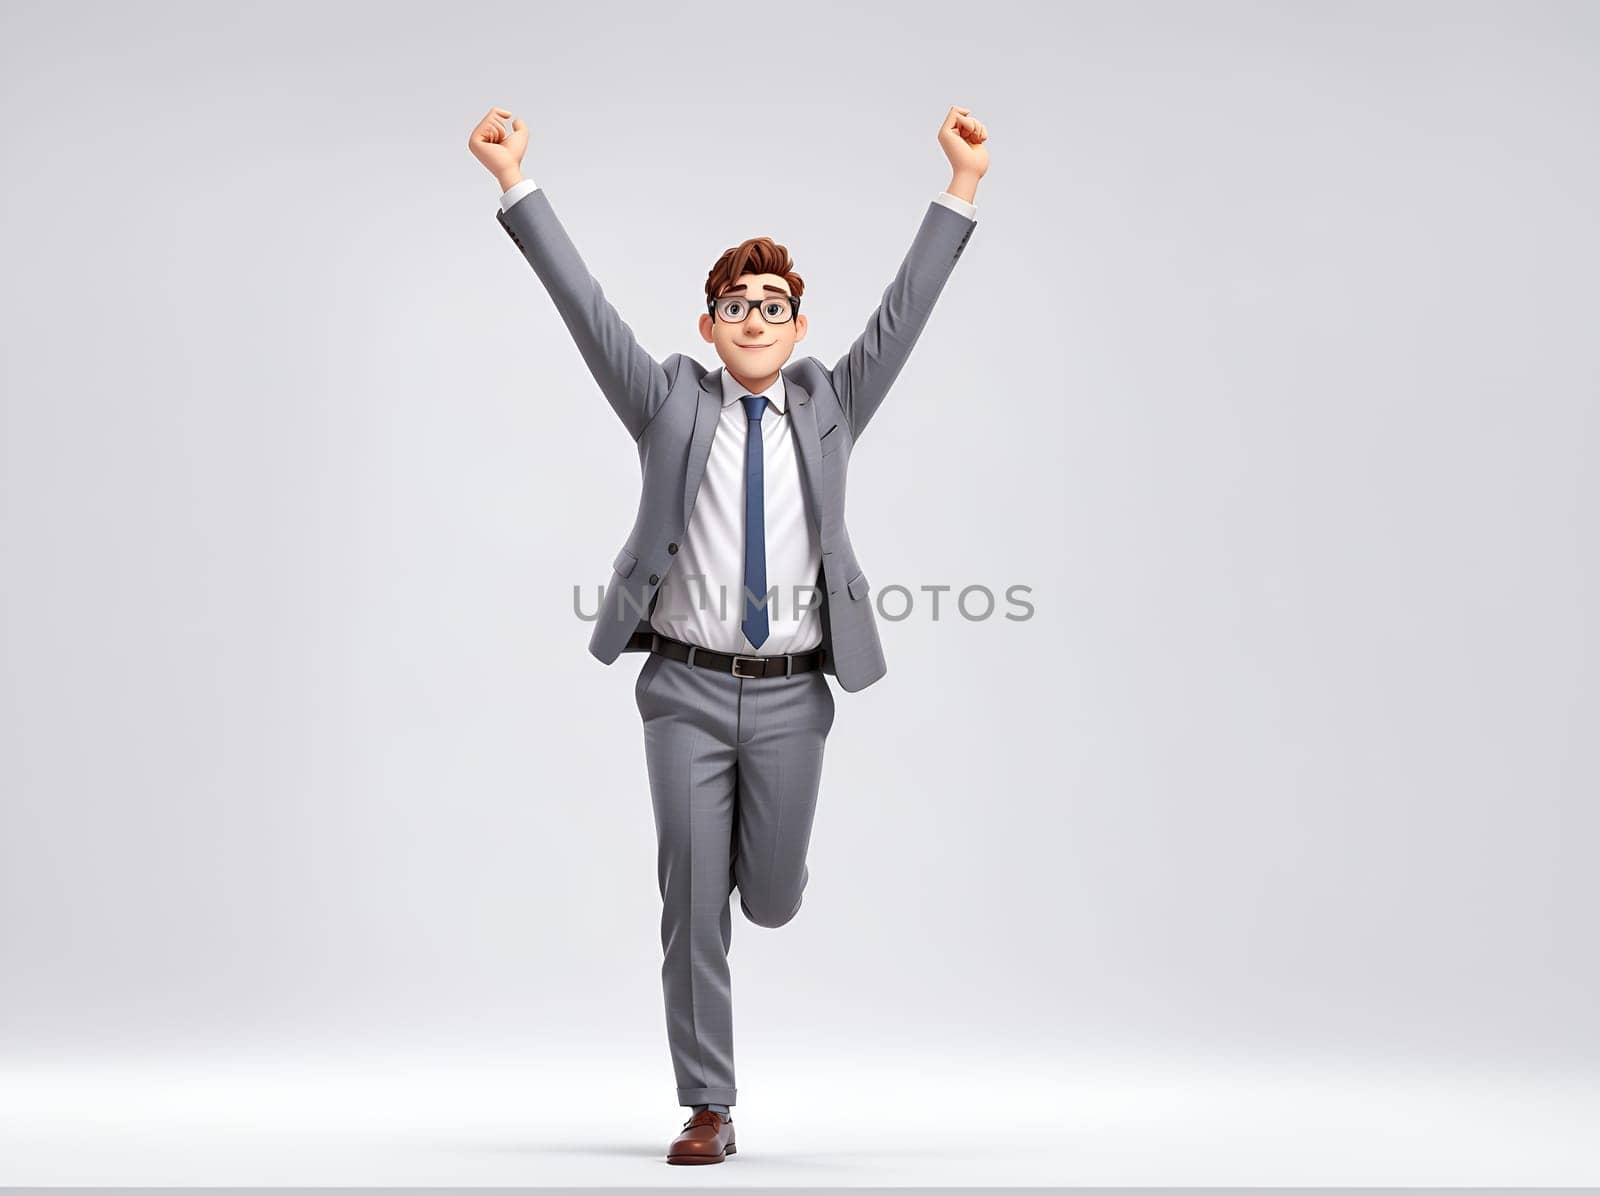 A professional man wearing a suit and tie jumps energetically against a clear blue sky.